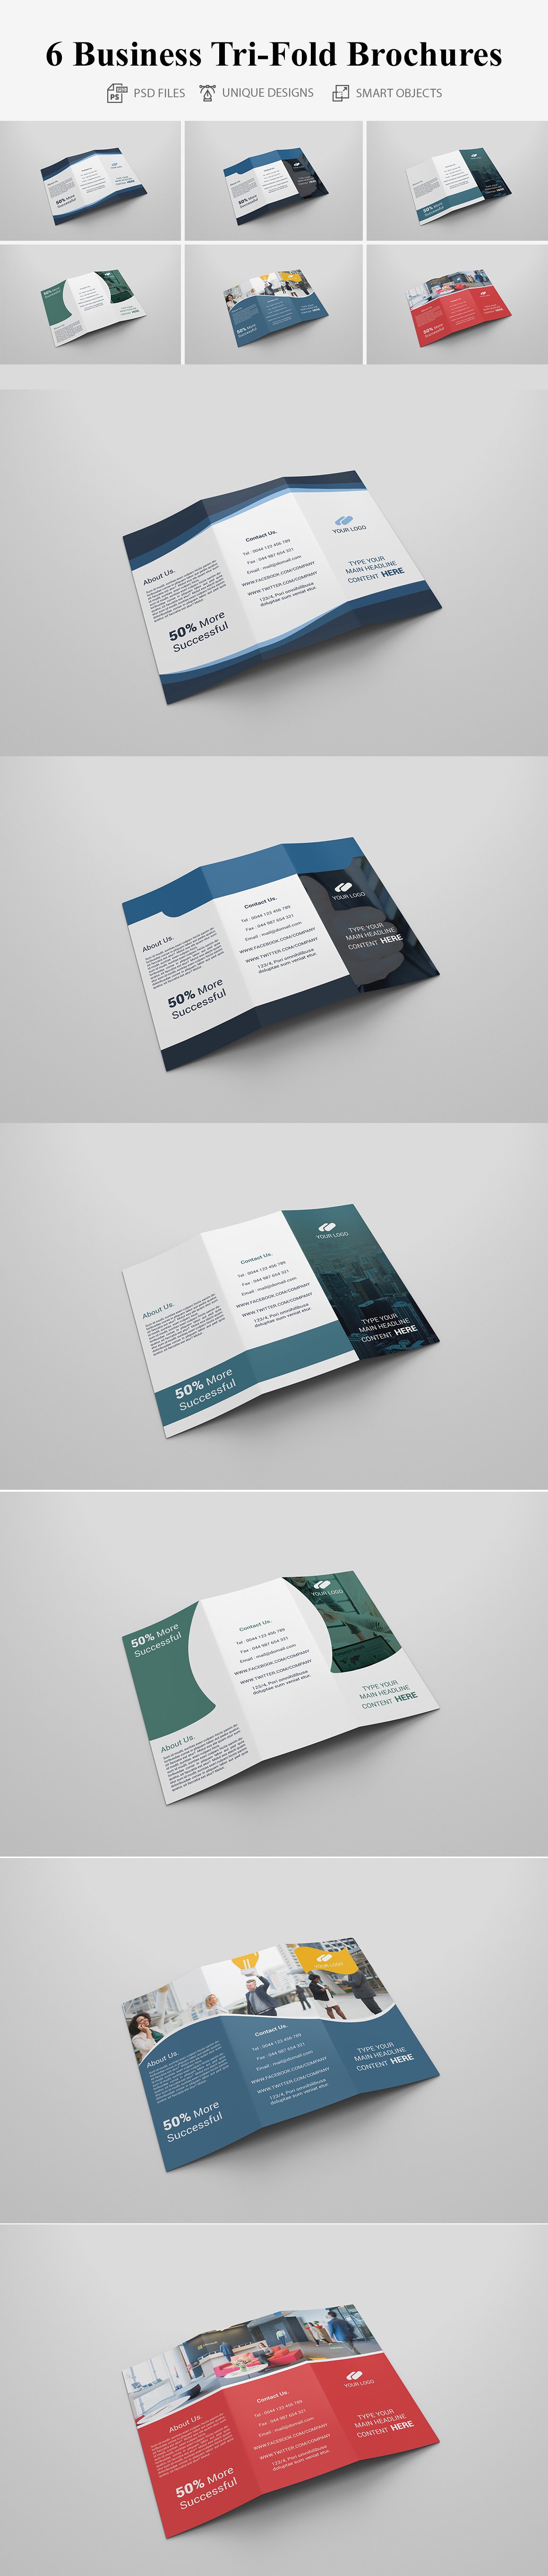 6 Business Tri-fold Brochures cover image.